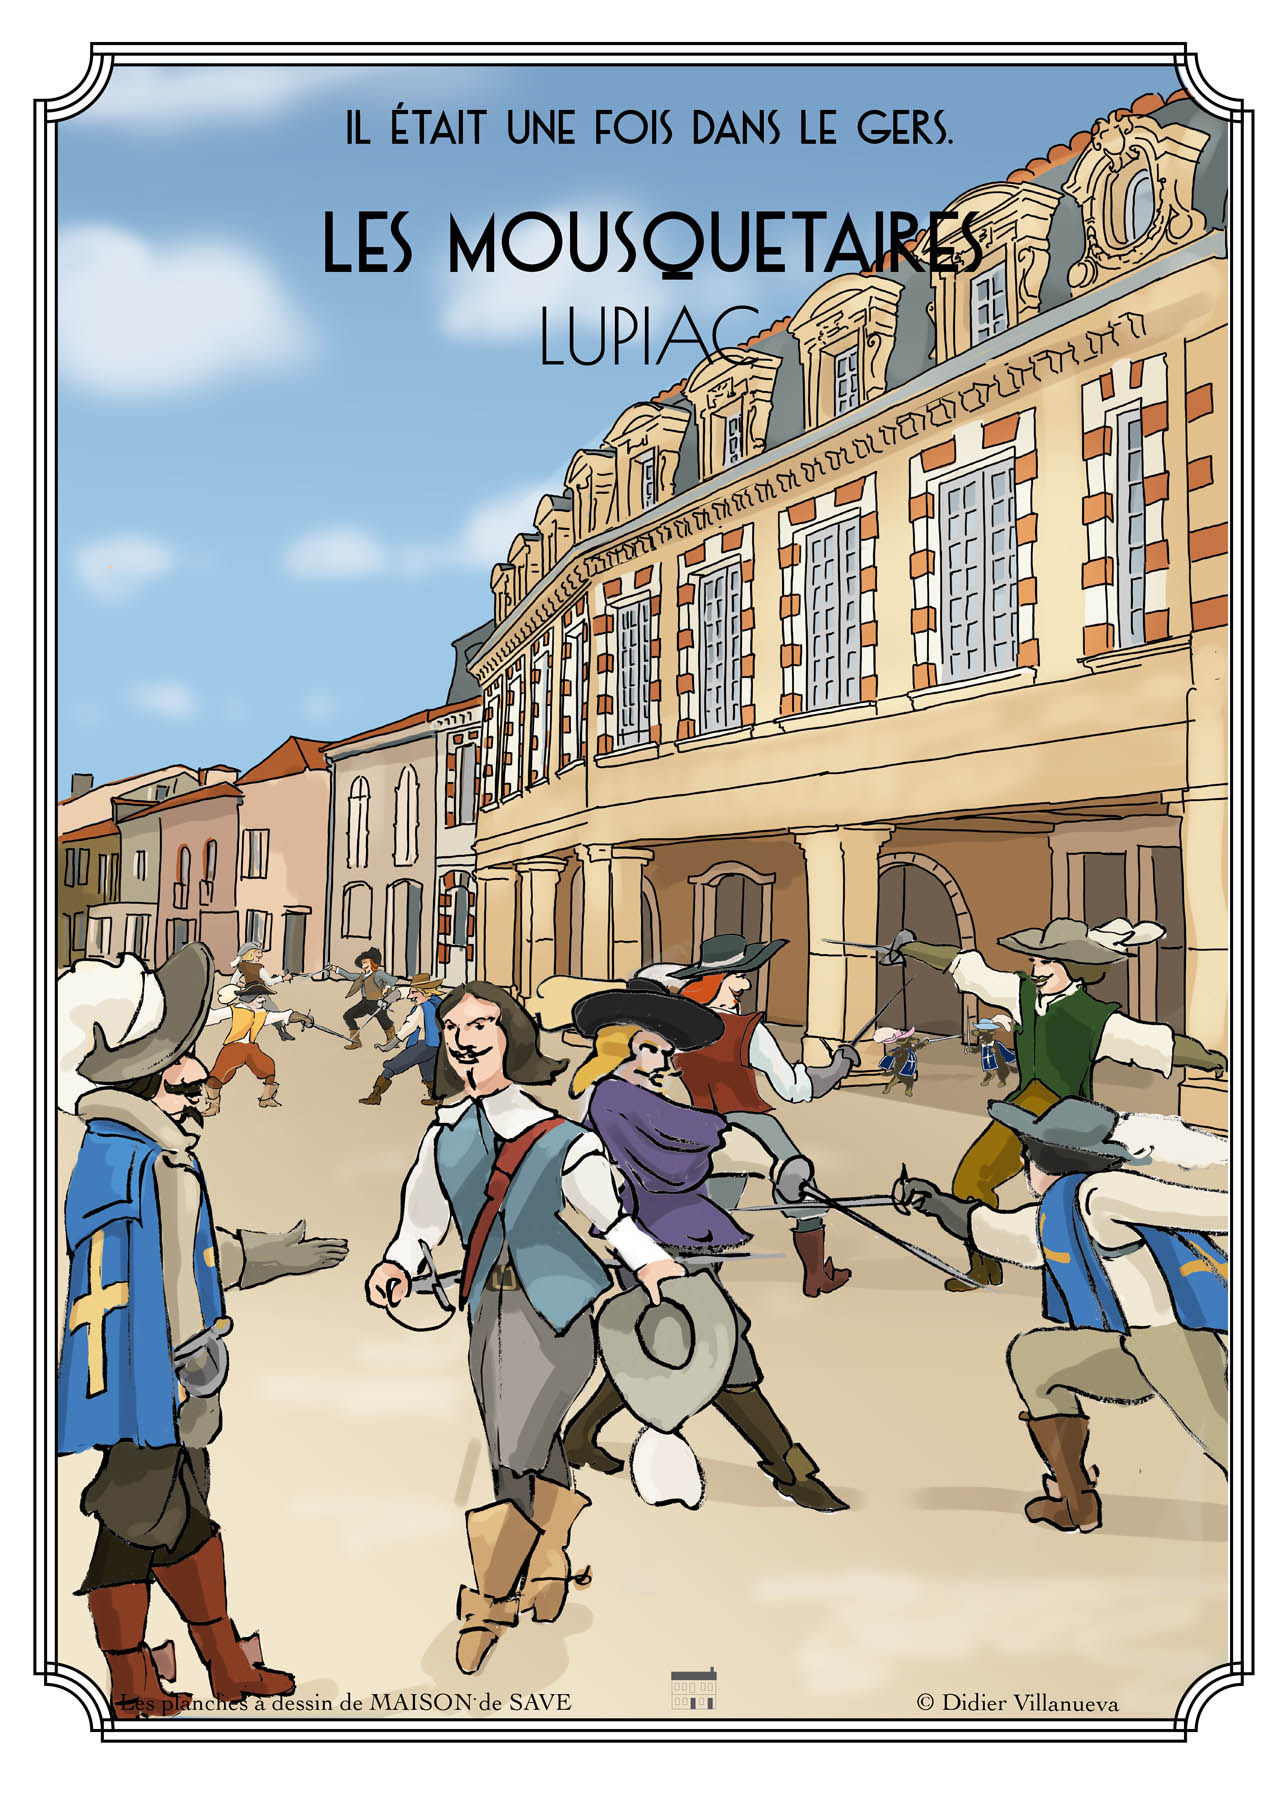 Mousquetaires lupiac Gers